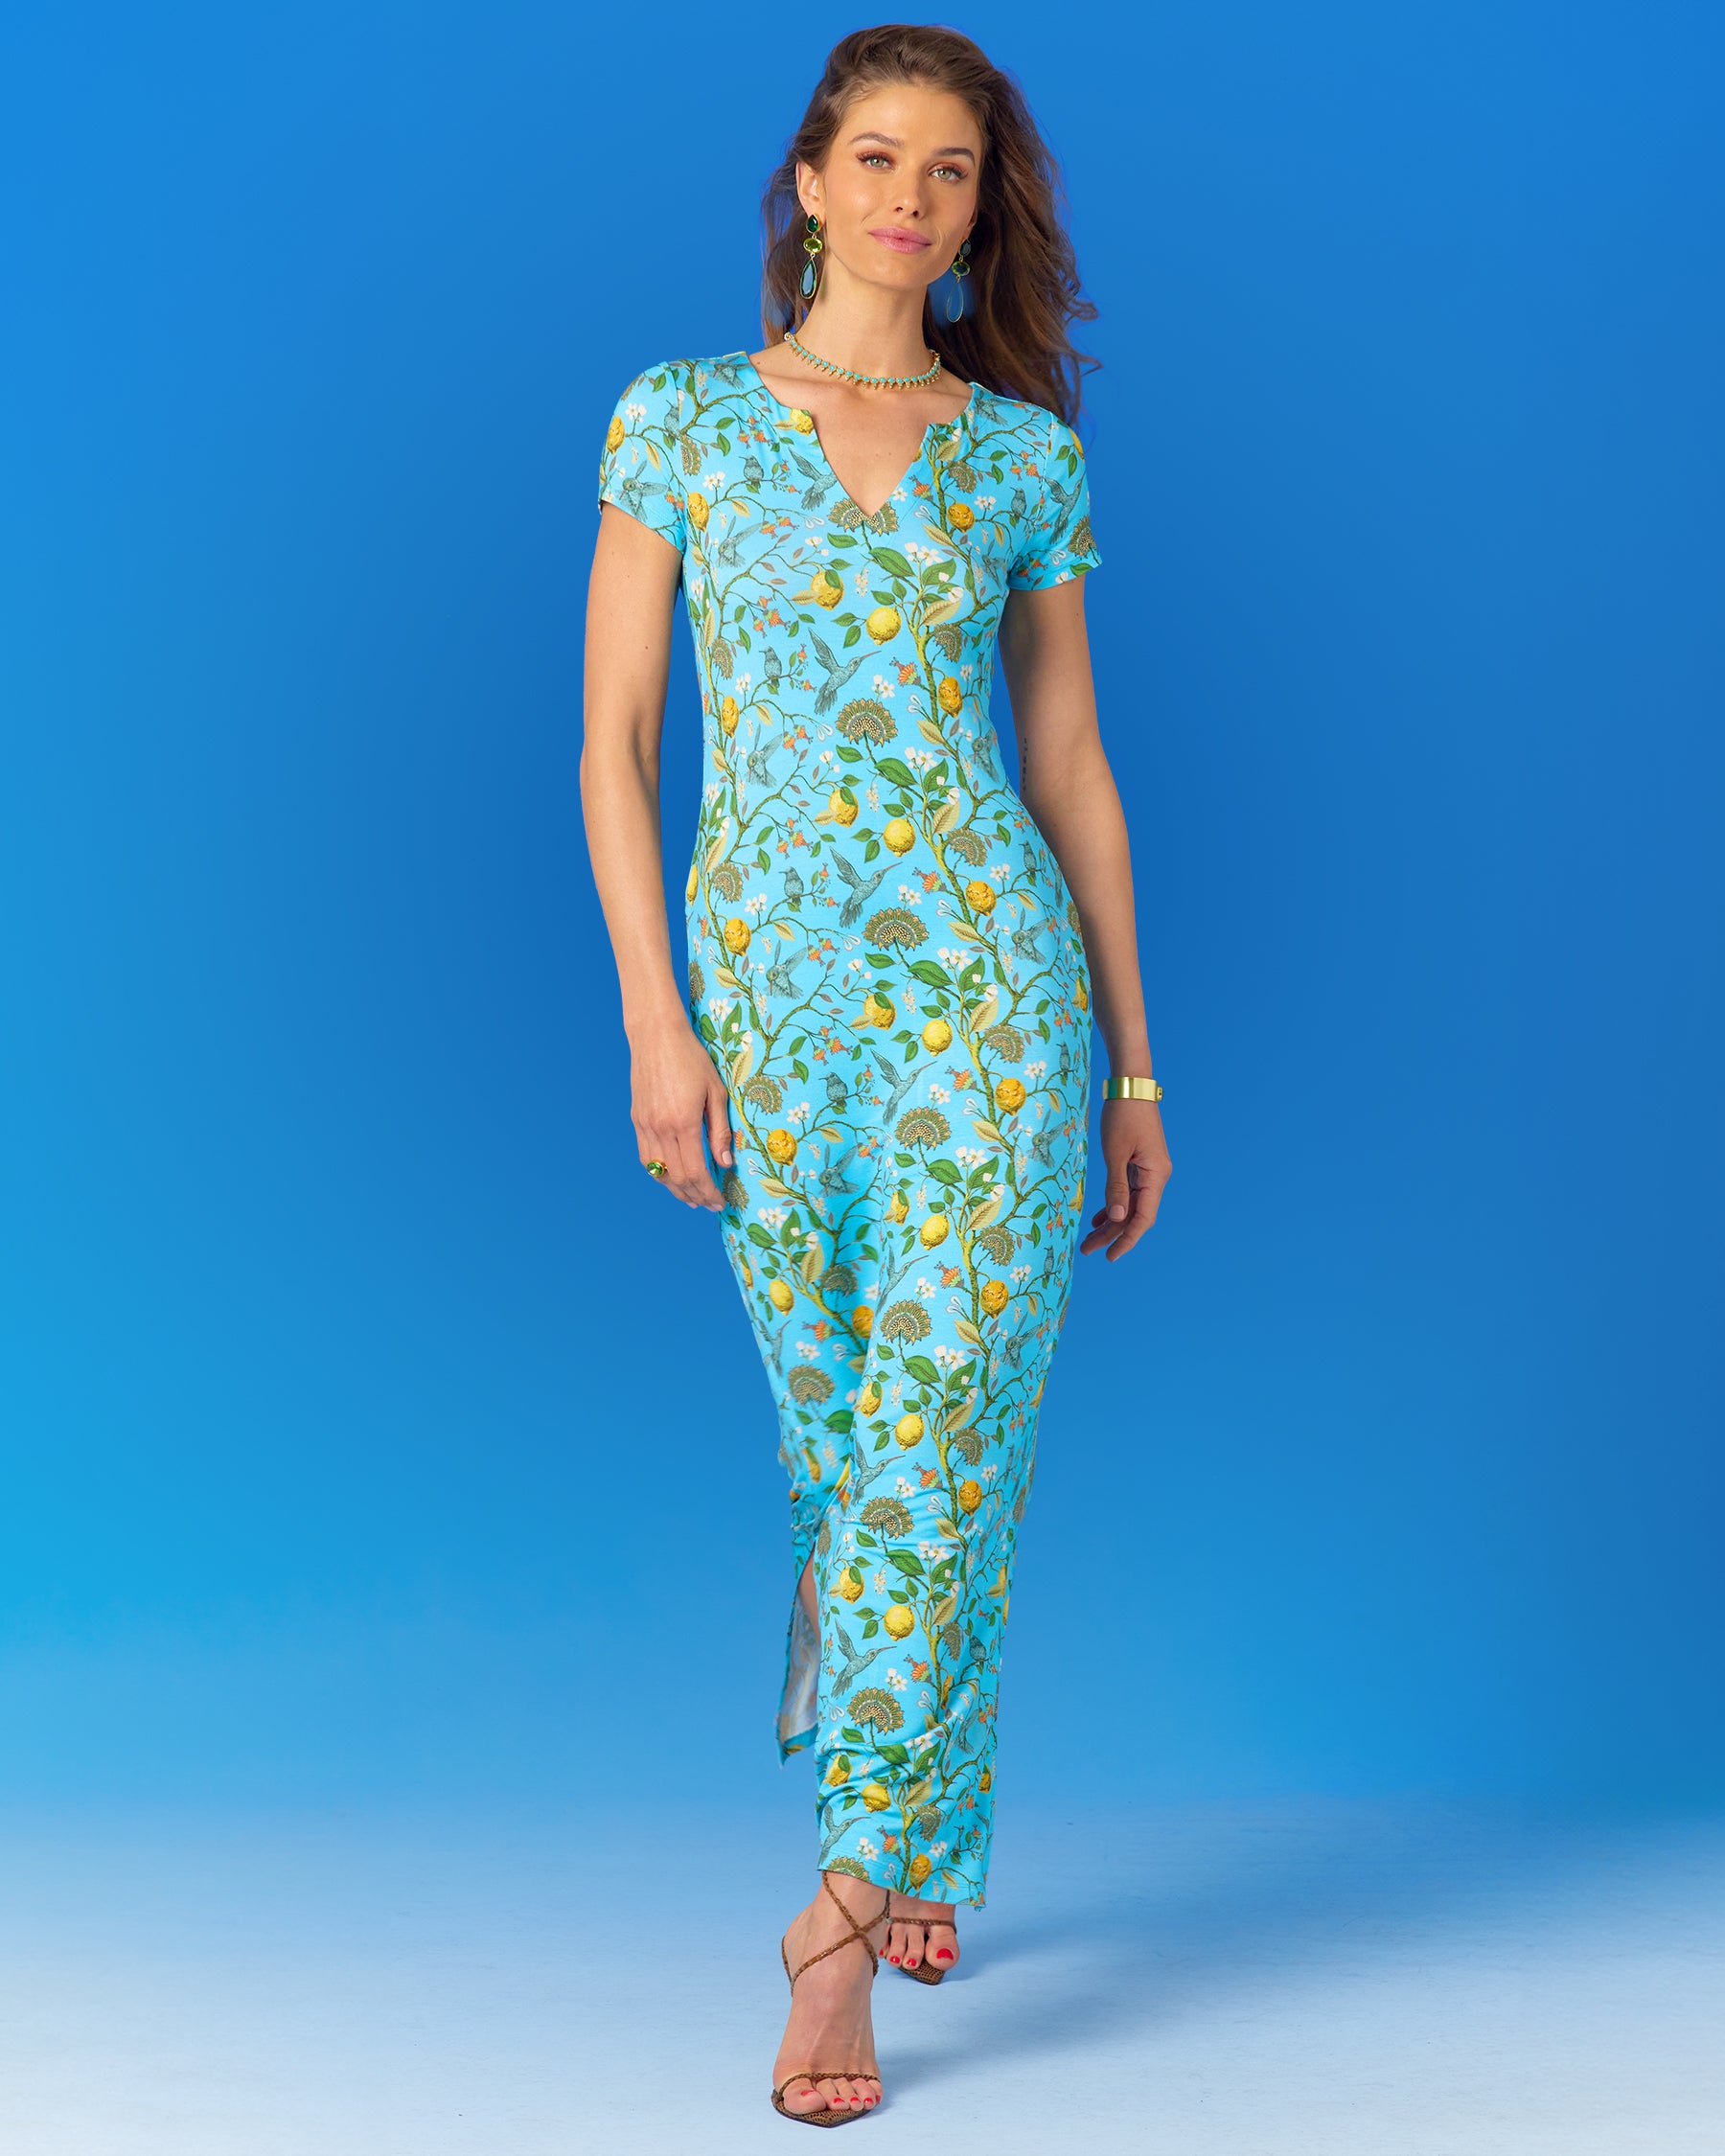 Flora Long Stretch Dress in Turquoise Hummingbird Print-Walking Front View